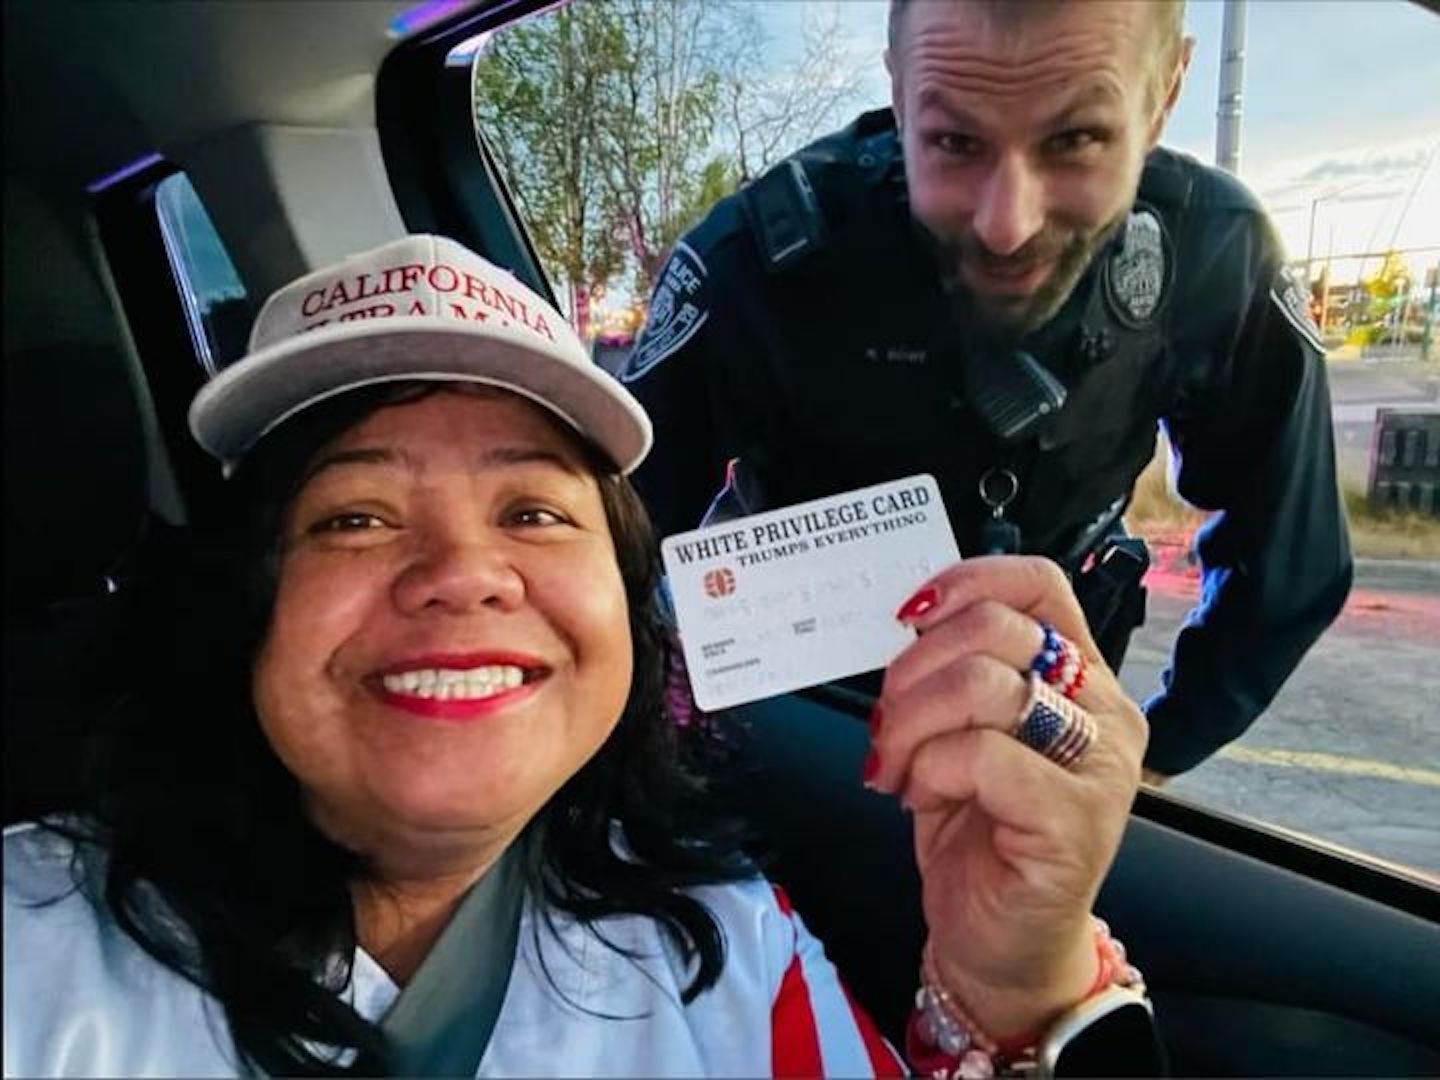 Cops Let a Woman Go Free After She Showed Her ‘White Privilege’ Card